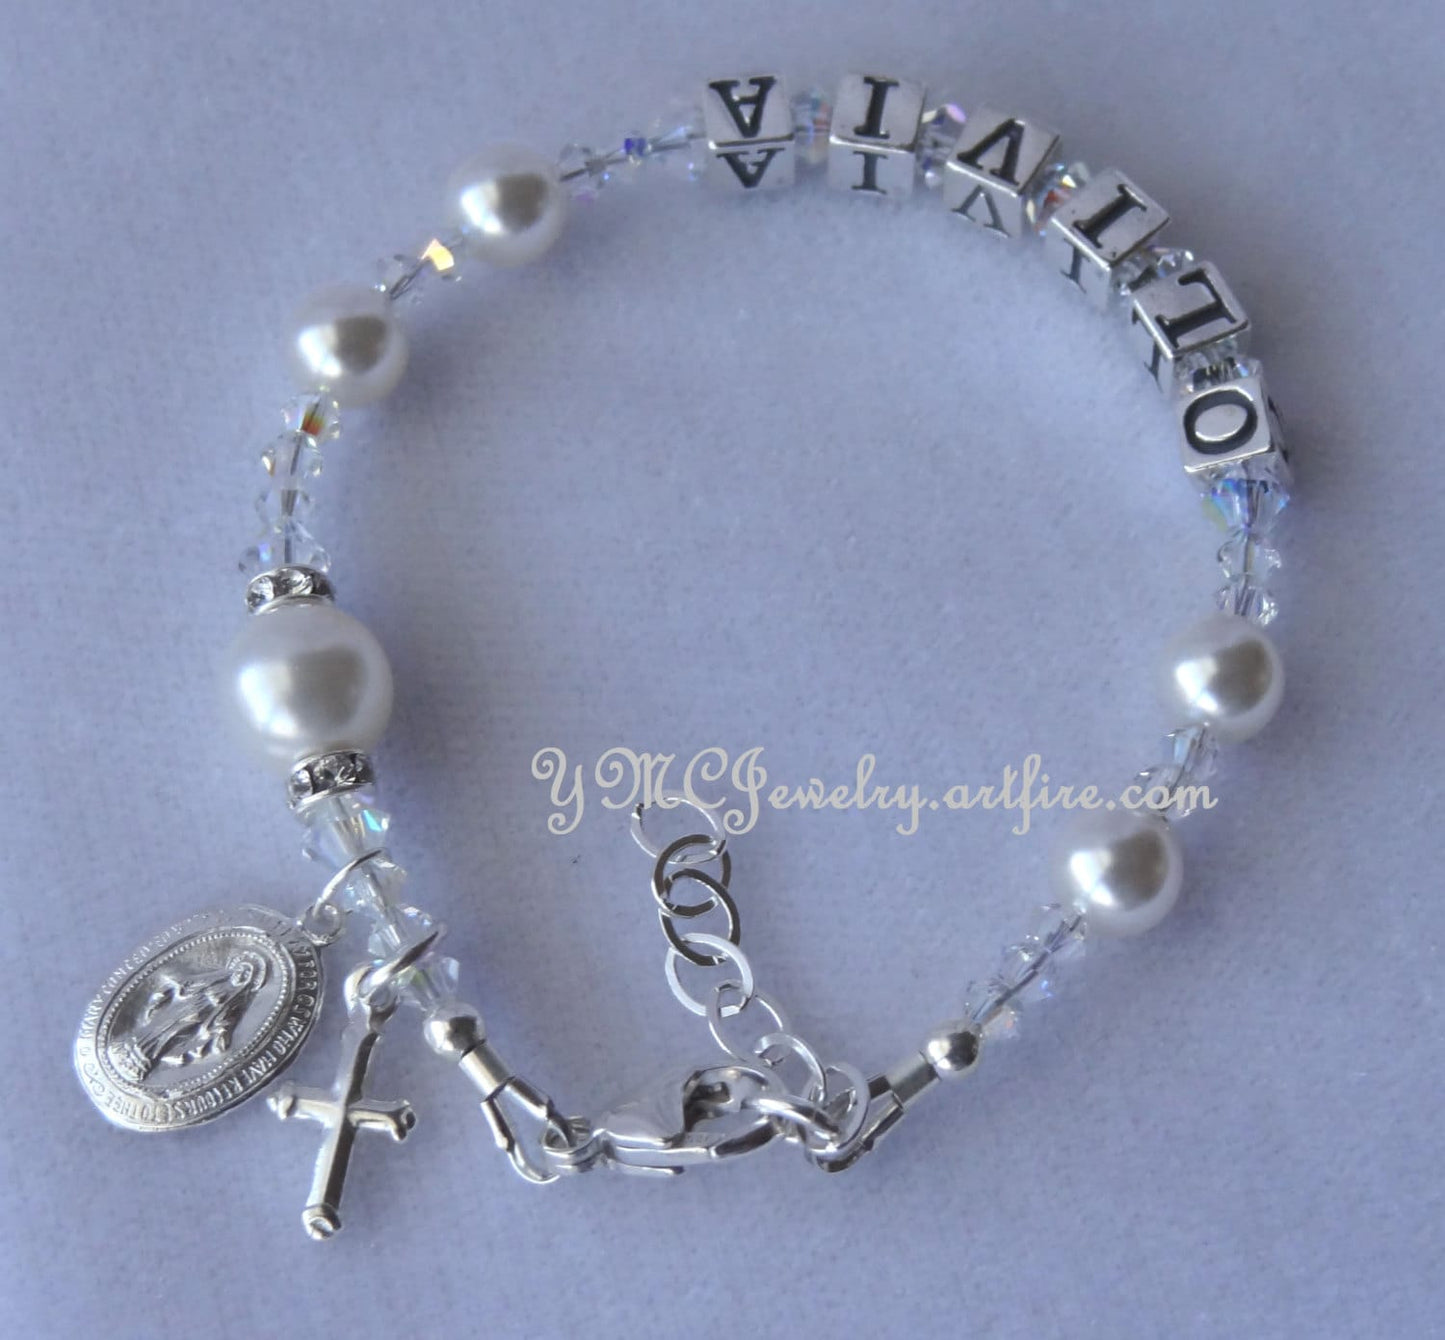 Personalized Name Pearl Rosary Chaplet Bracelet,First Communion Rosary Bracelet